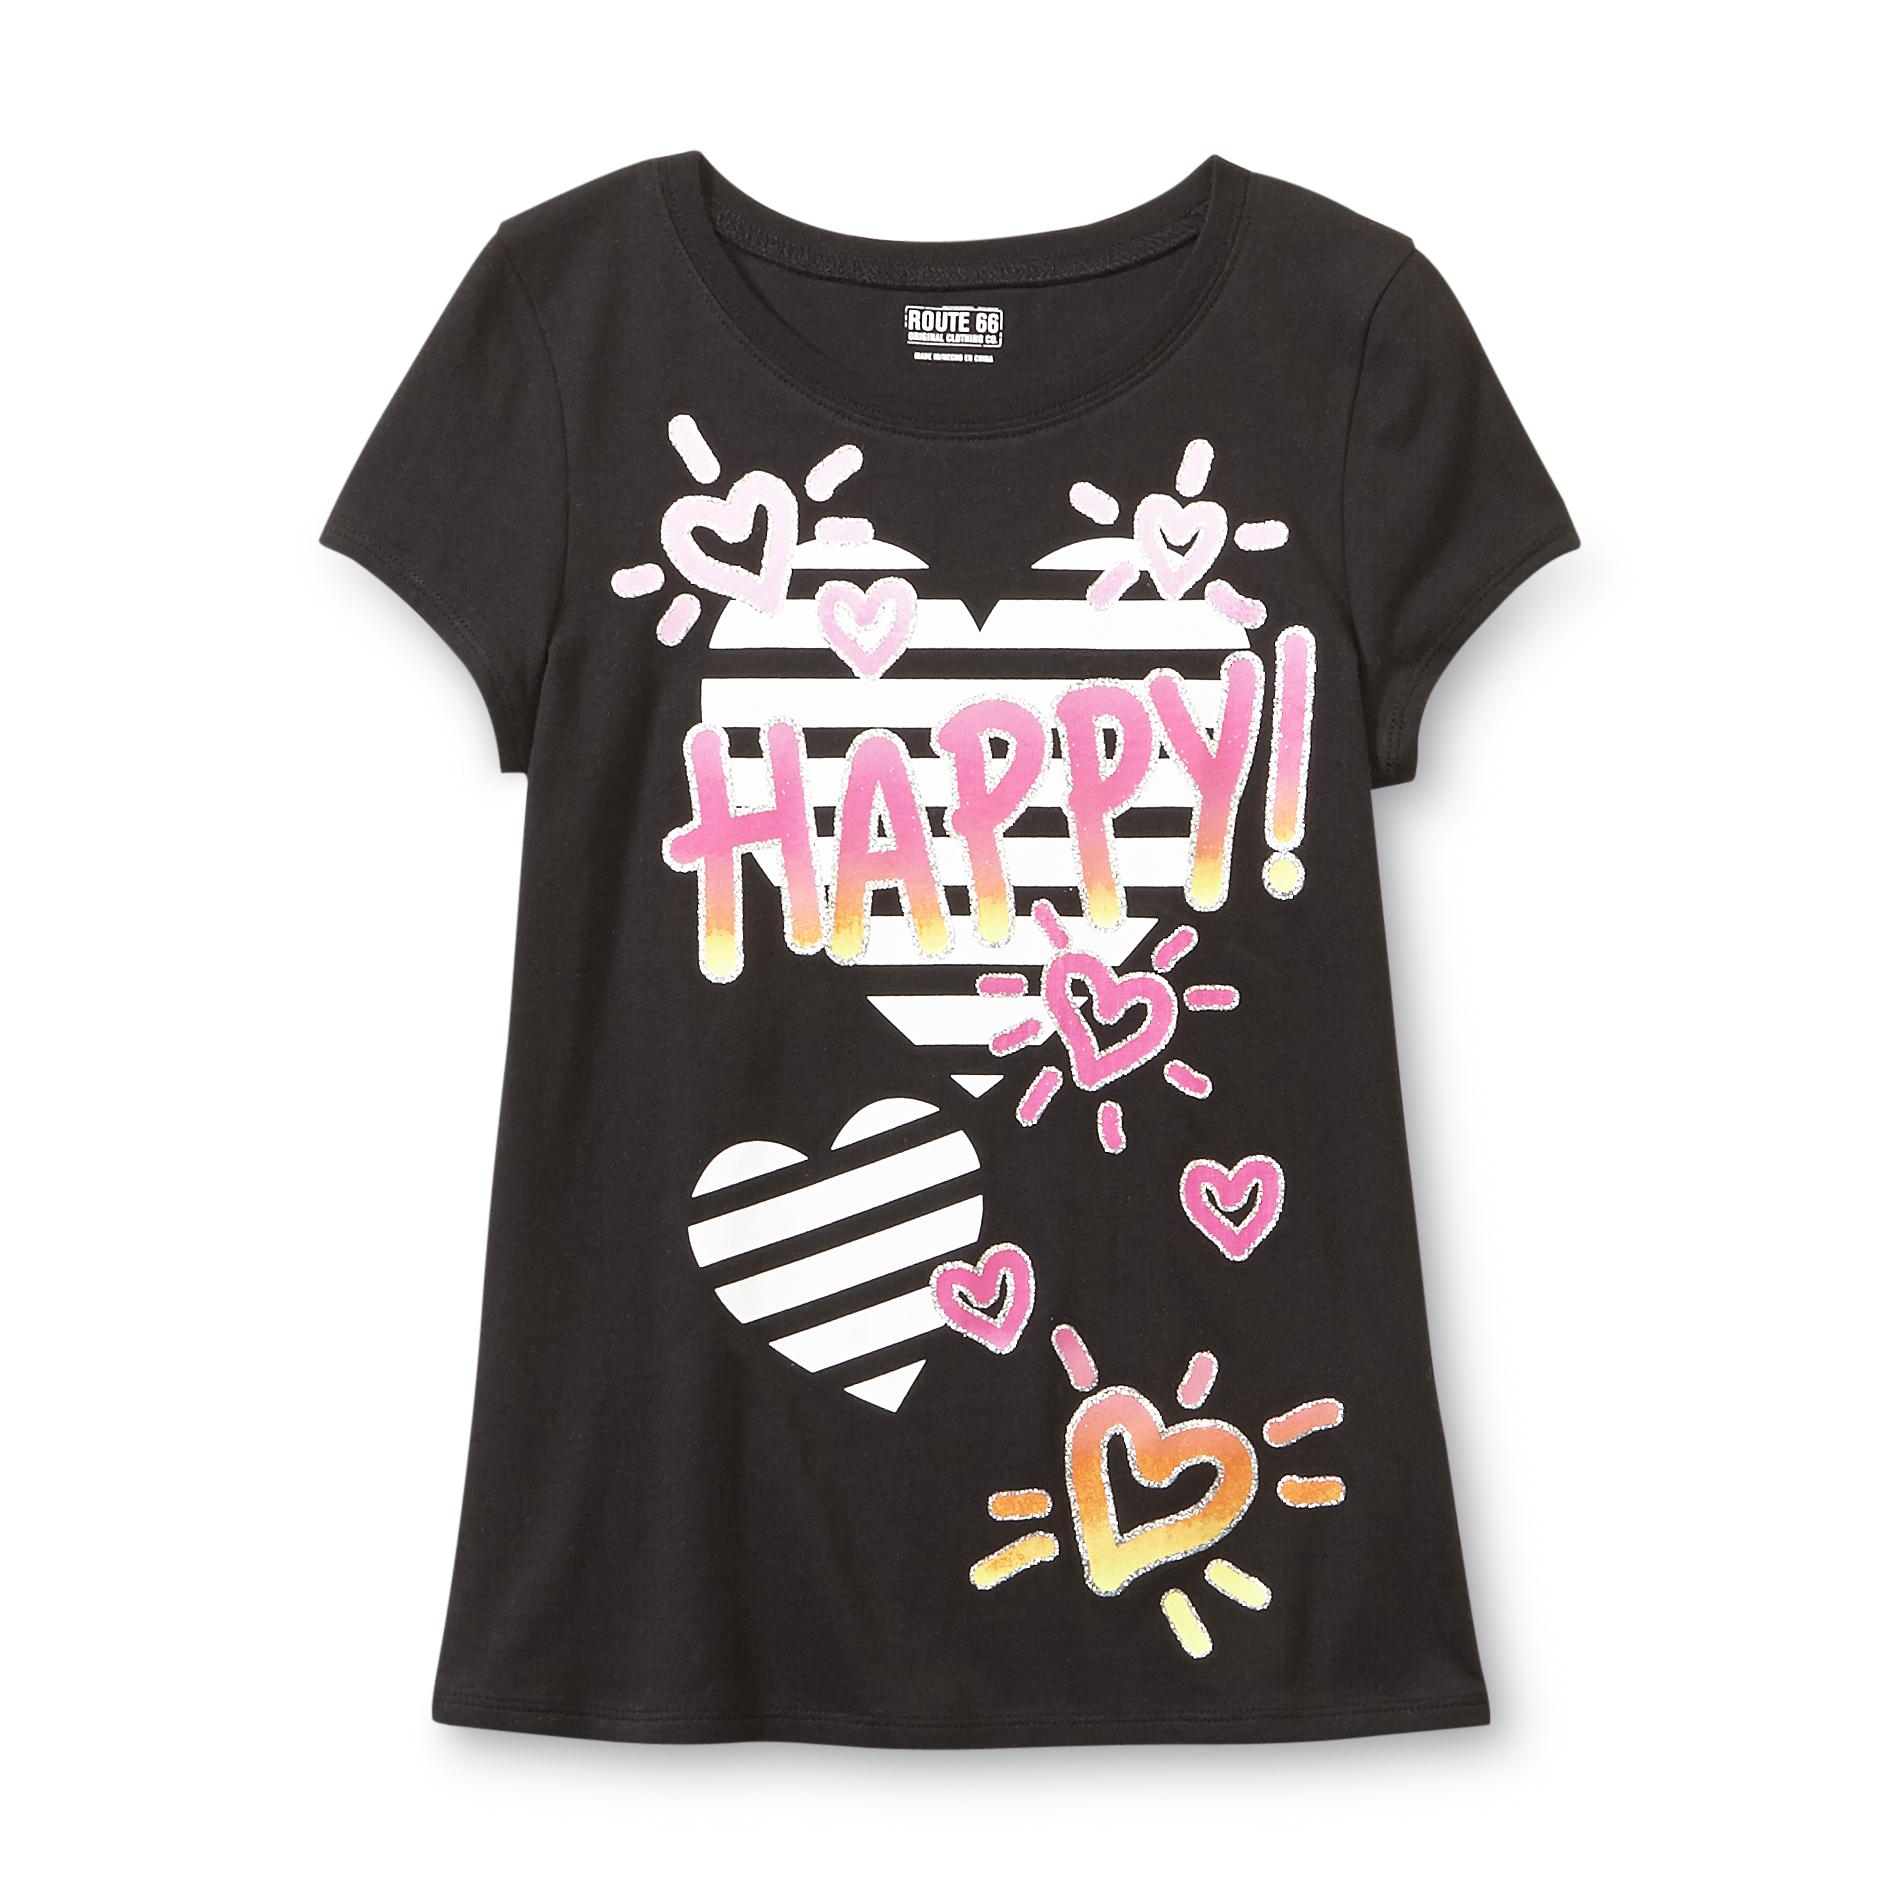 Route 66 Girl's Graphic Top - Happy